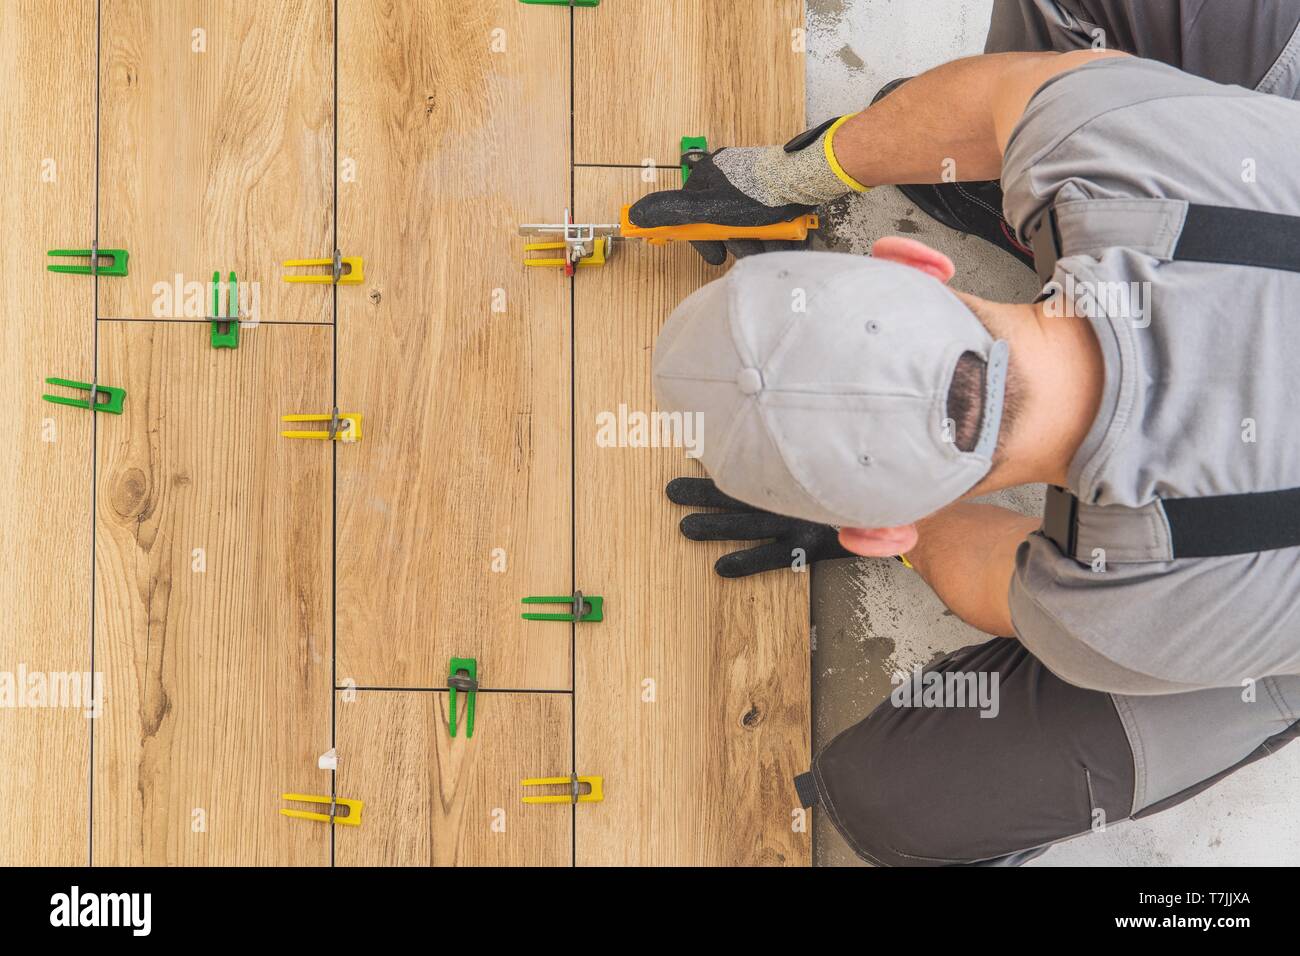 Professional Remodeling Worker Installing Wooden Like Ceramic Floor in the Kitchen Area. Home Renovation Project. Stock Photo